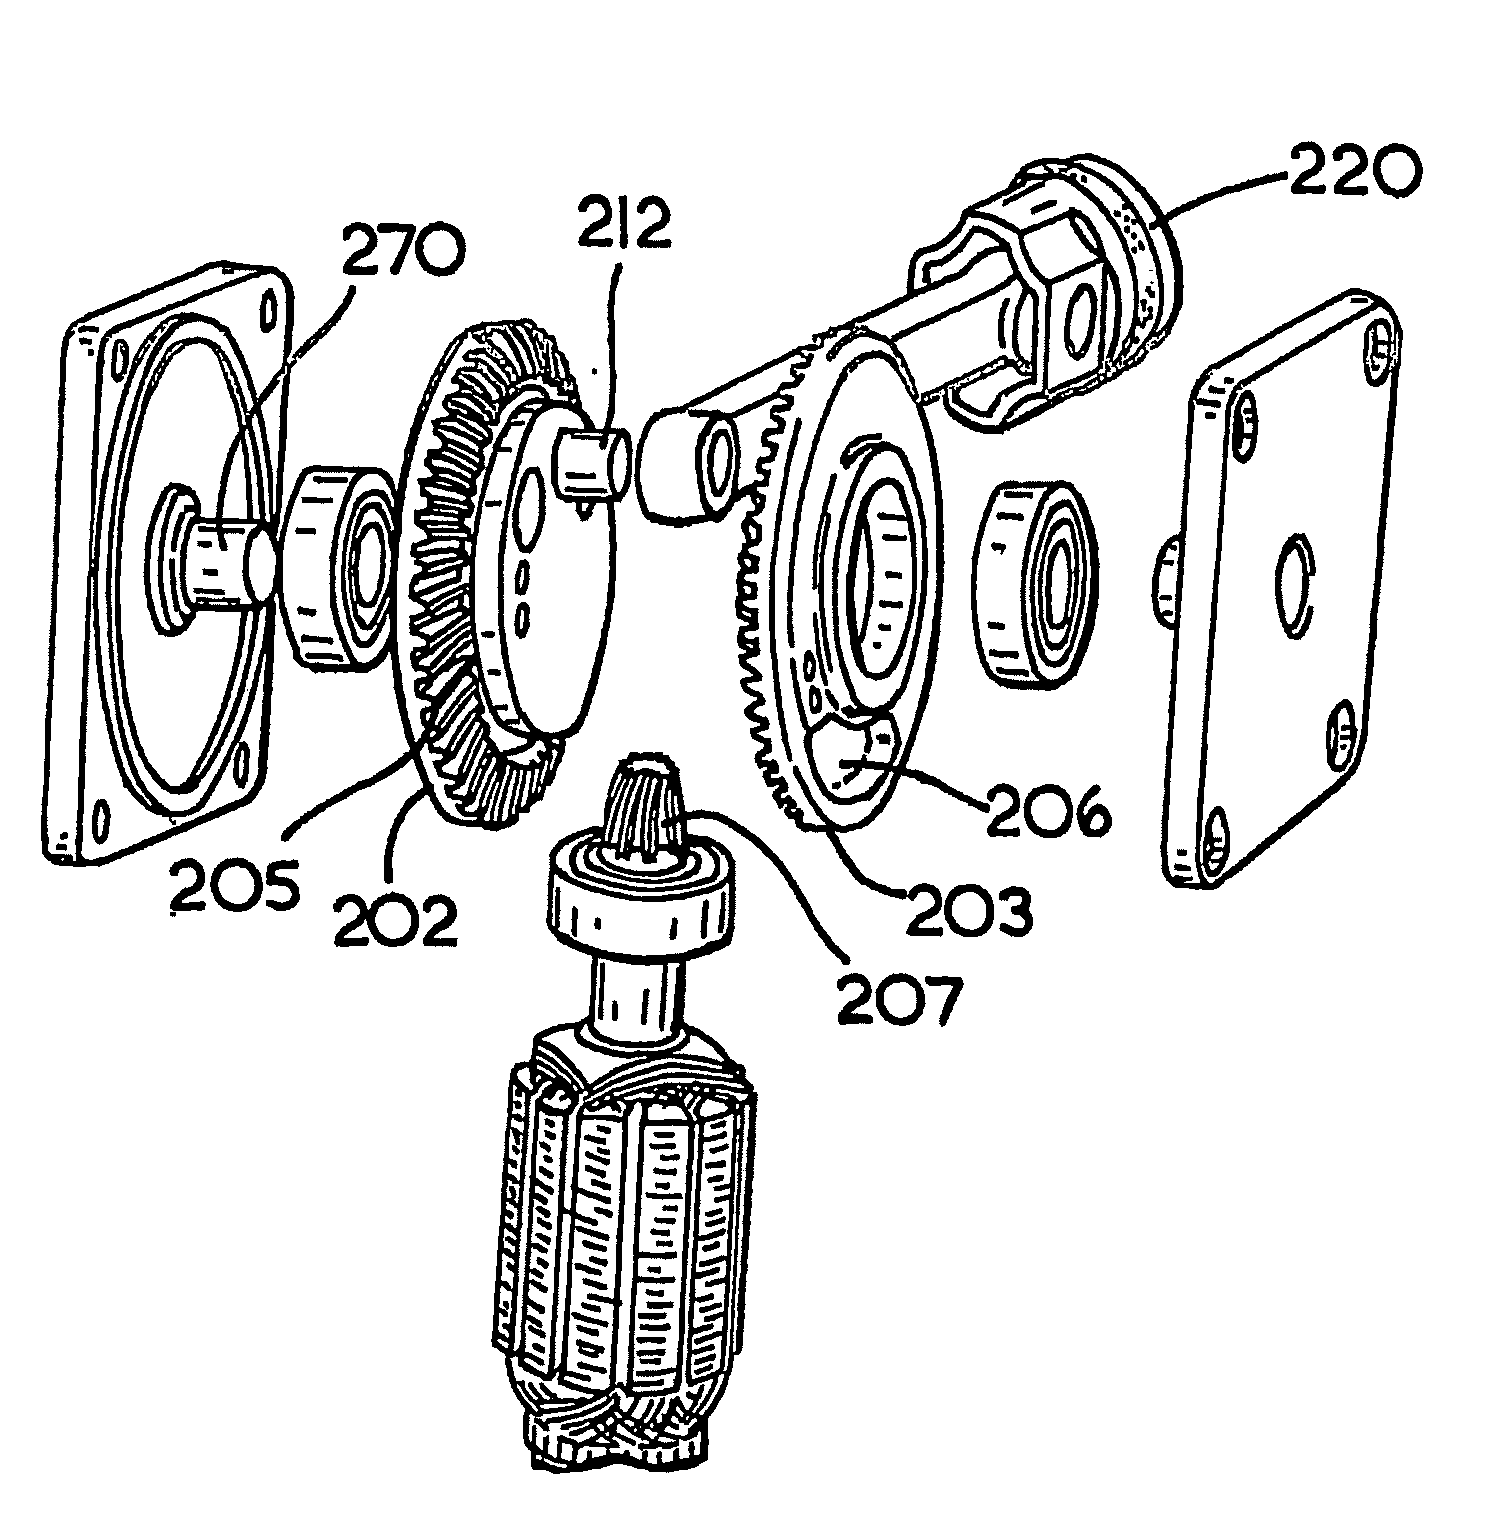 Vibration reduction apparatus for power tool and power tool incorporating such apparatus